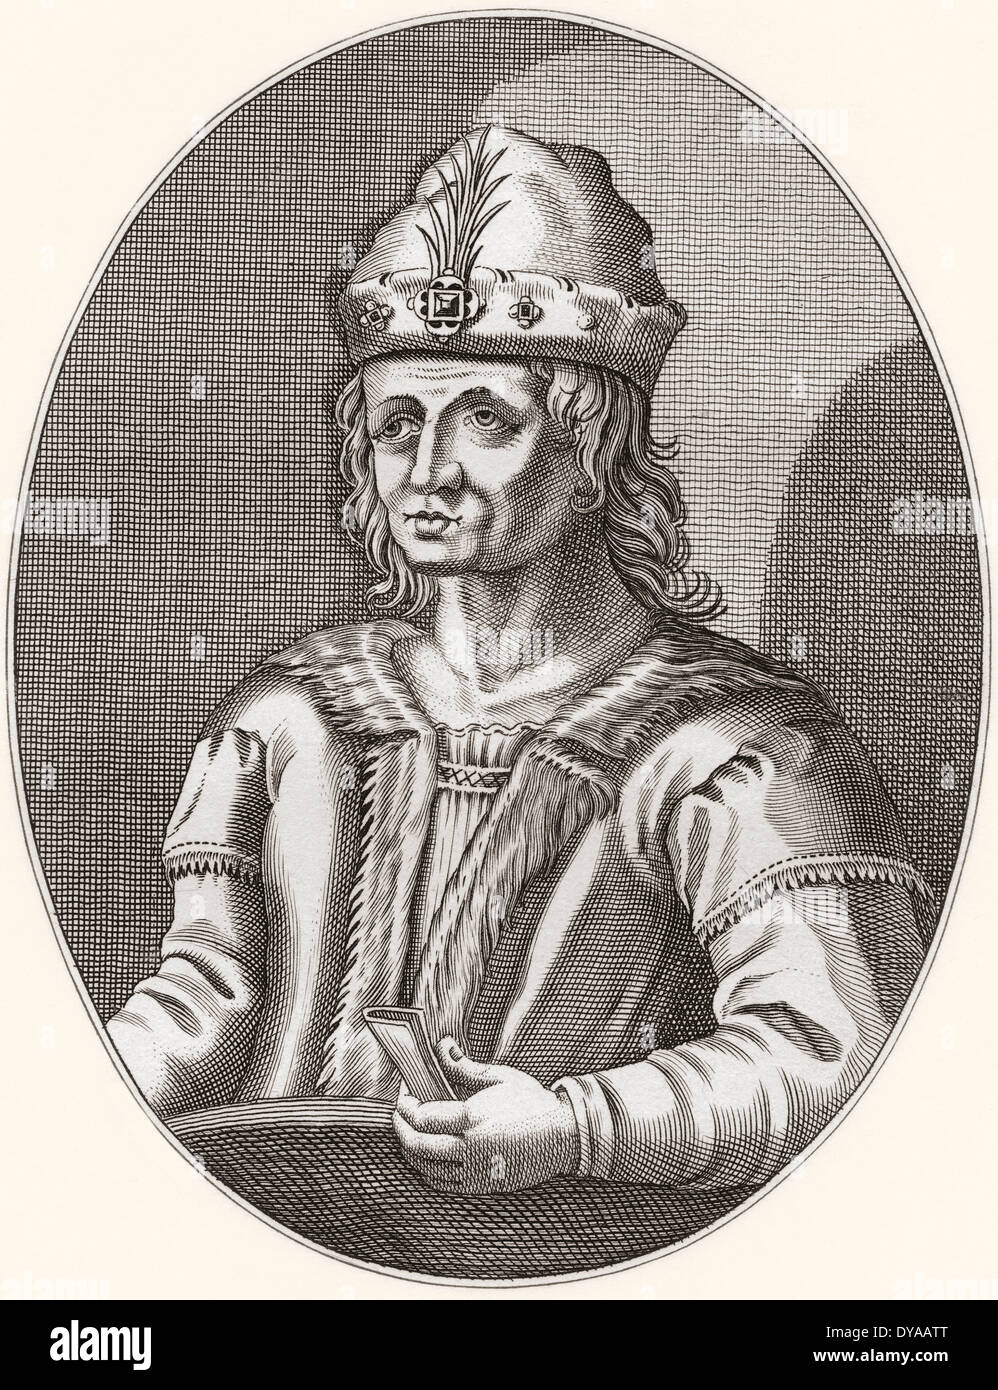 Robert II of Scotland, 1316 – 1390. King of Scots from 1371 to his death as the first monarch of the House of Stewart. Stock Photo